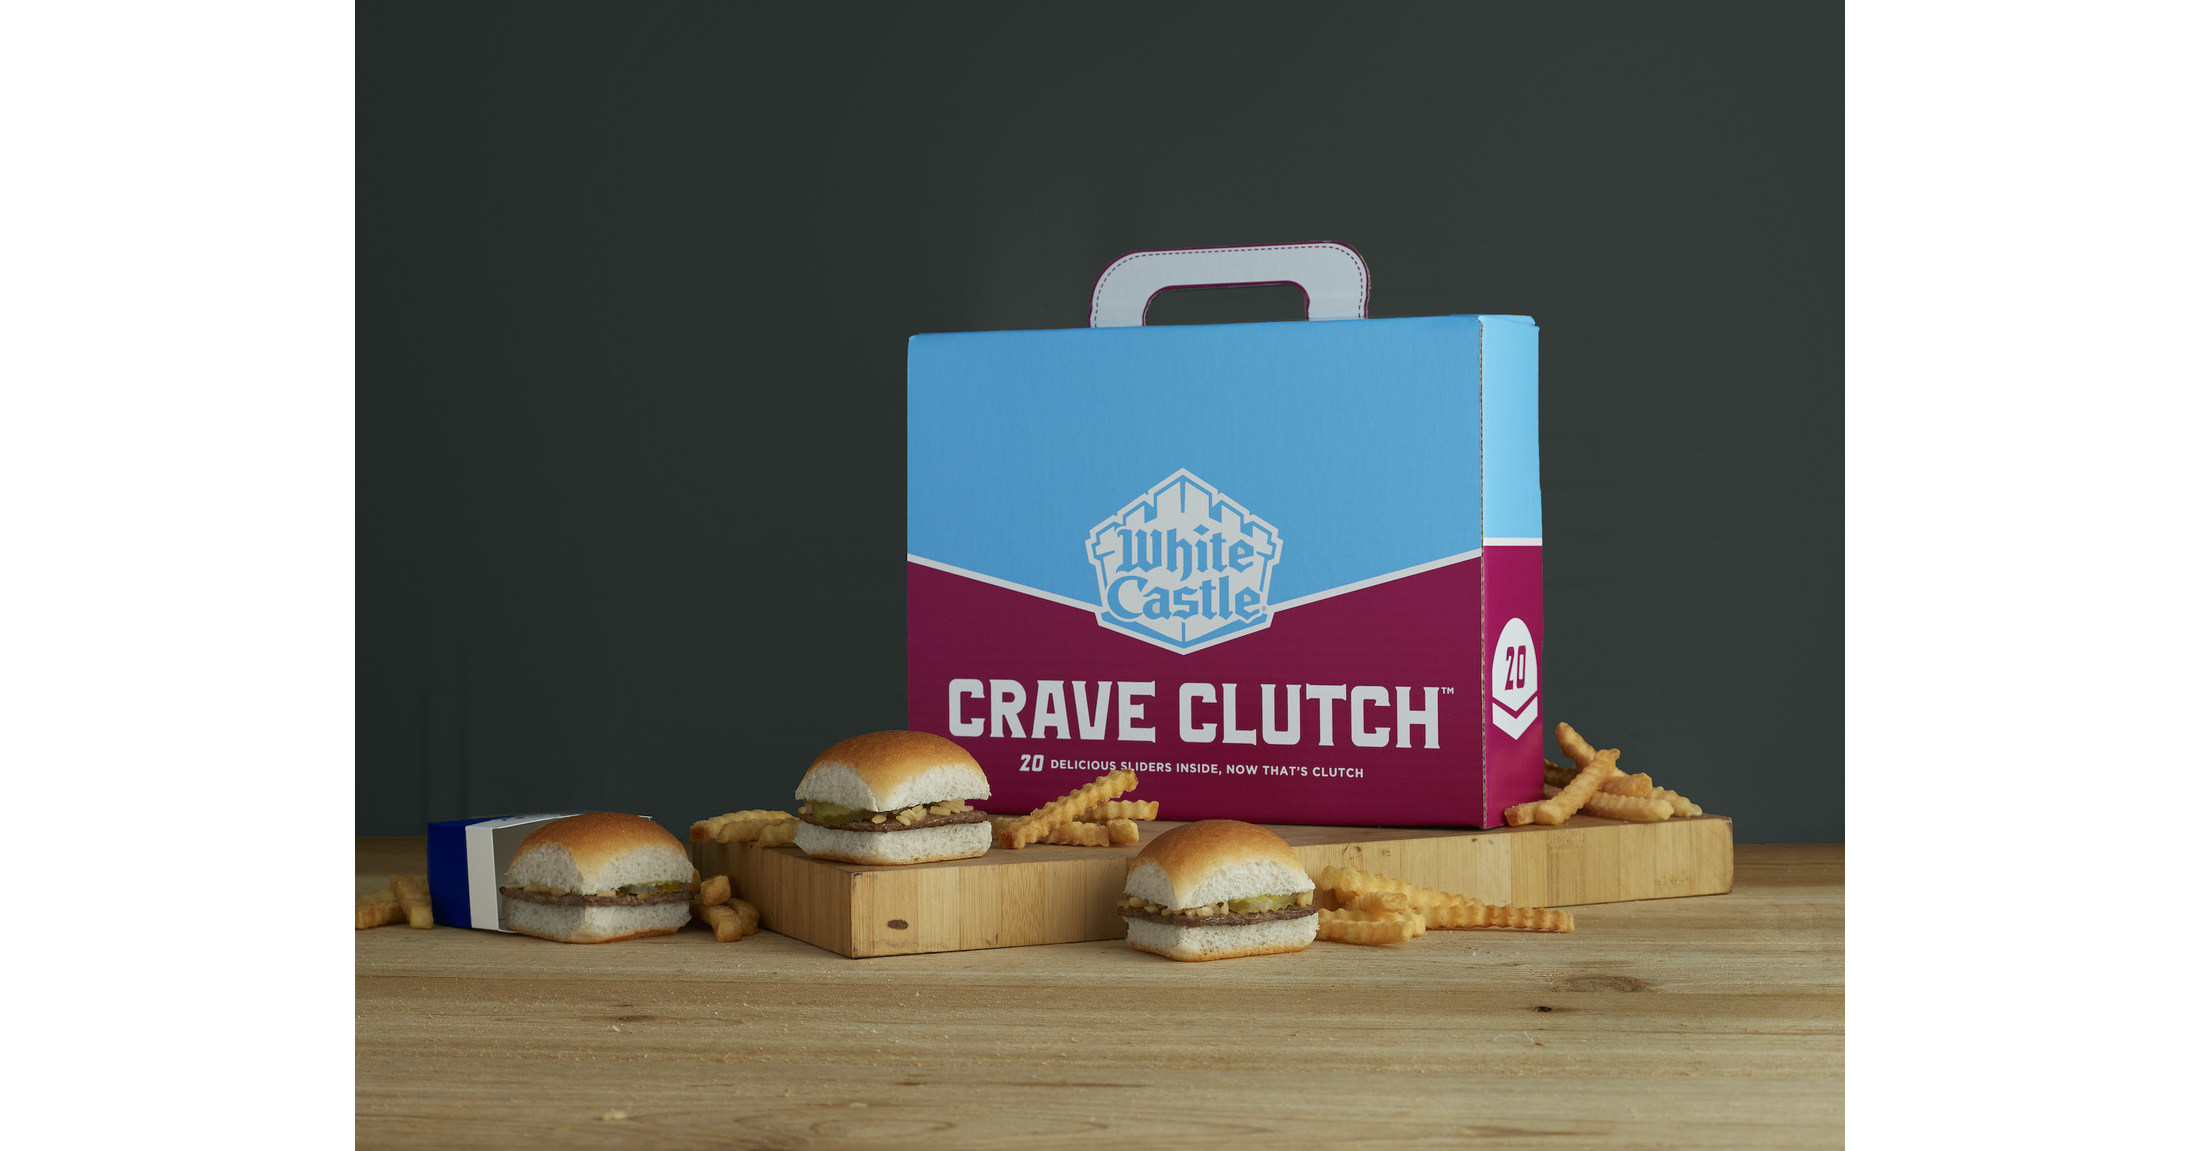 White Castle's 'Crave Clutch™' Comes in Clutch for Smaller Gatherings